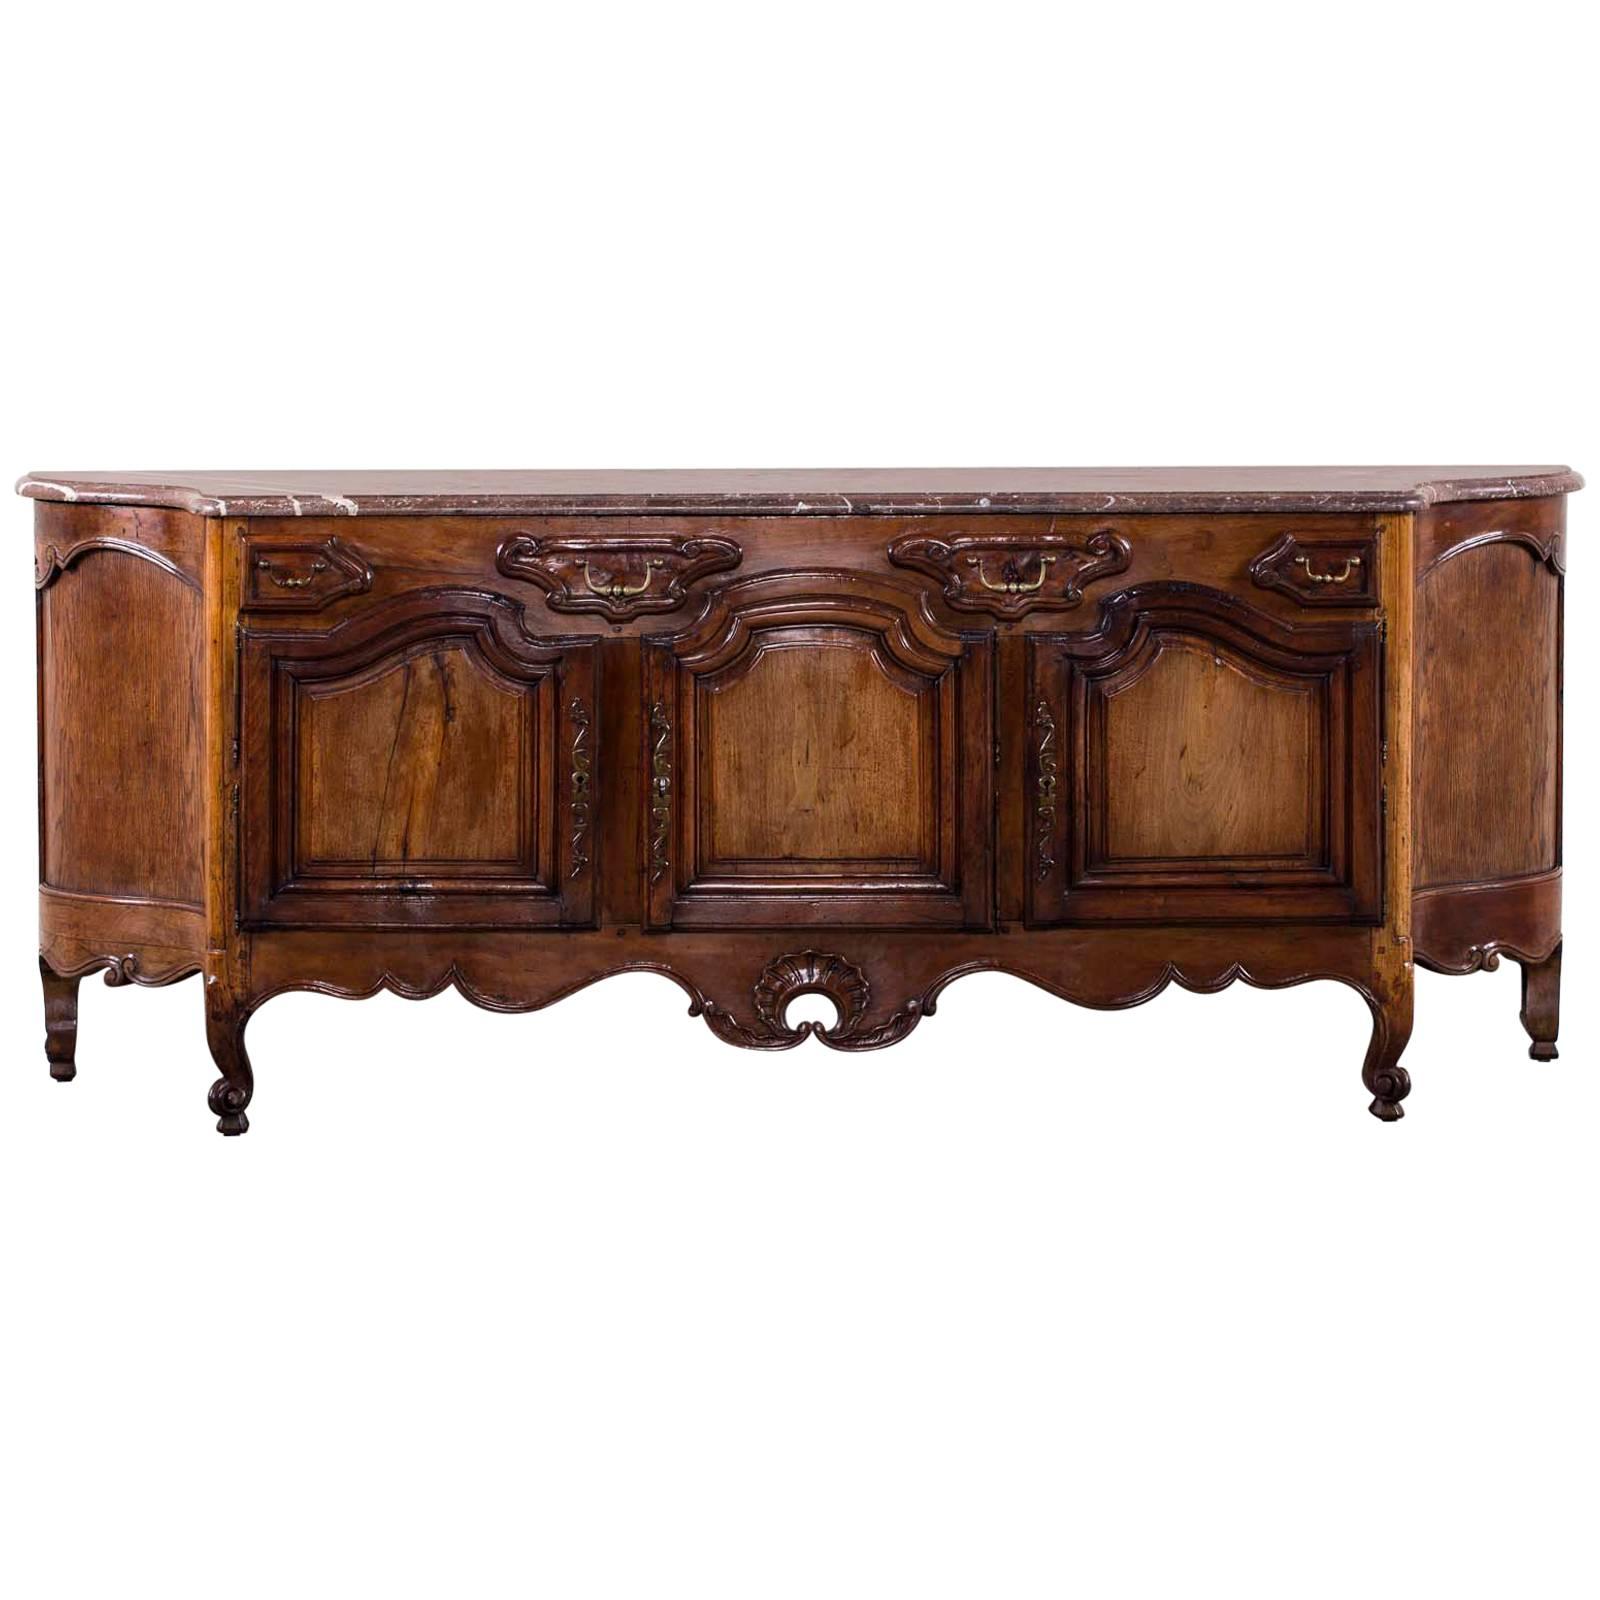 Antique French Louis XV Style Walnut Marble-Top Buffet Credenza, France, 1780